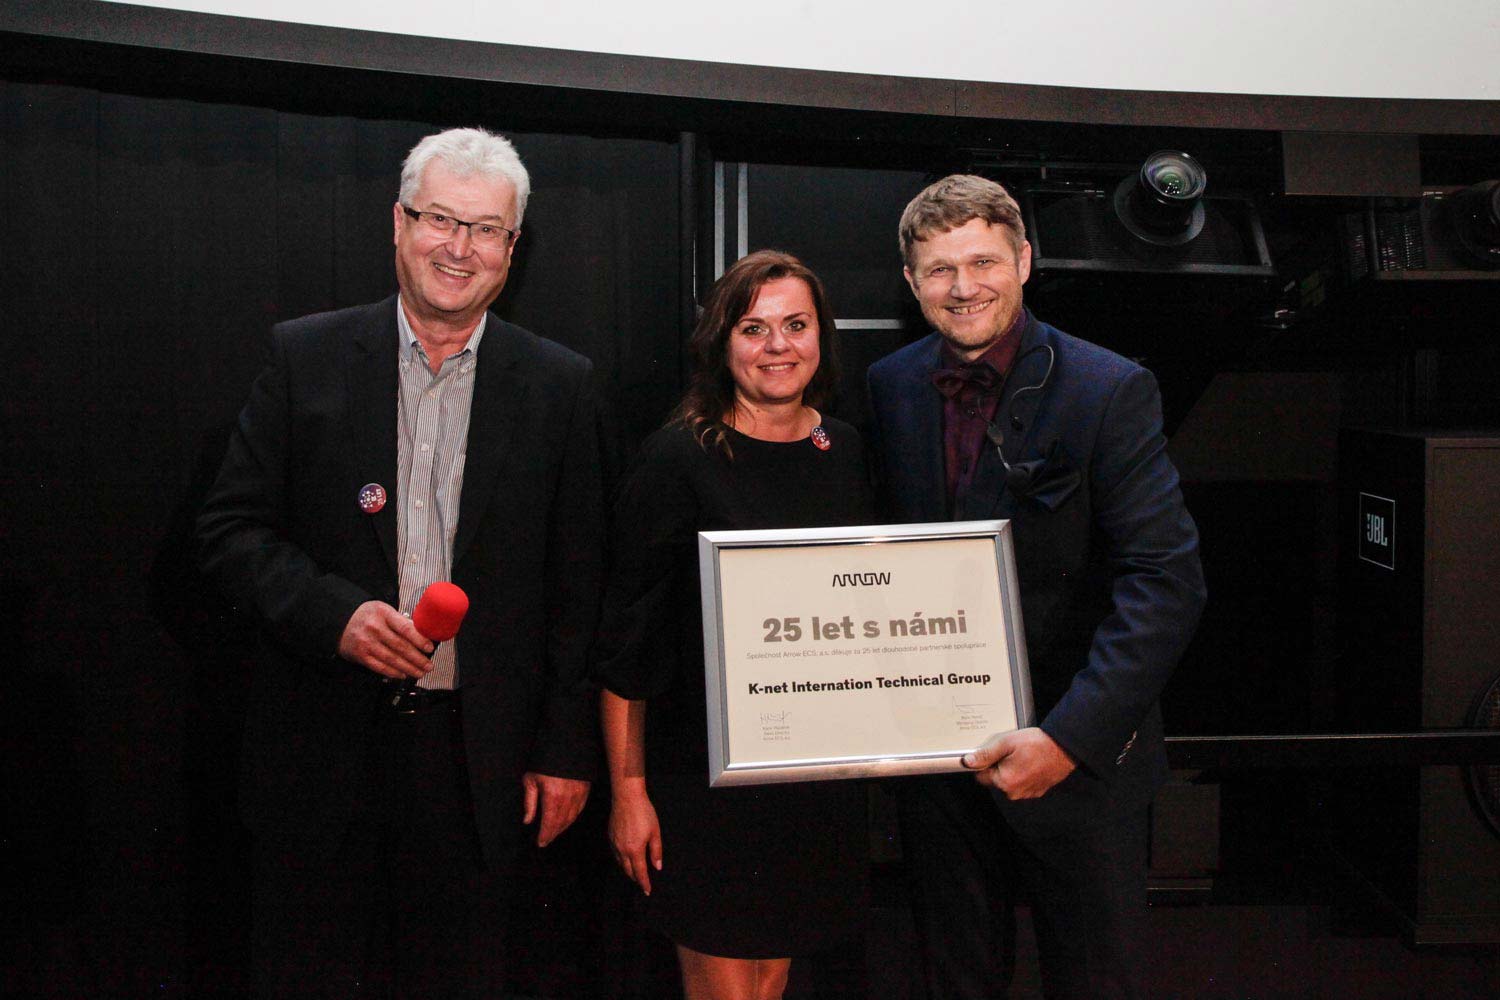 Tomas Knettig with partners from Arrow during the 25th anniversary of K-net